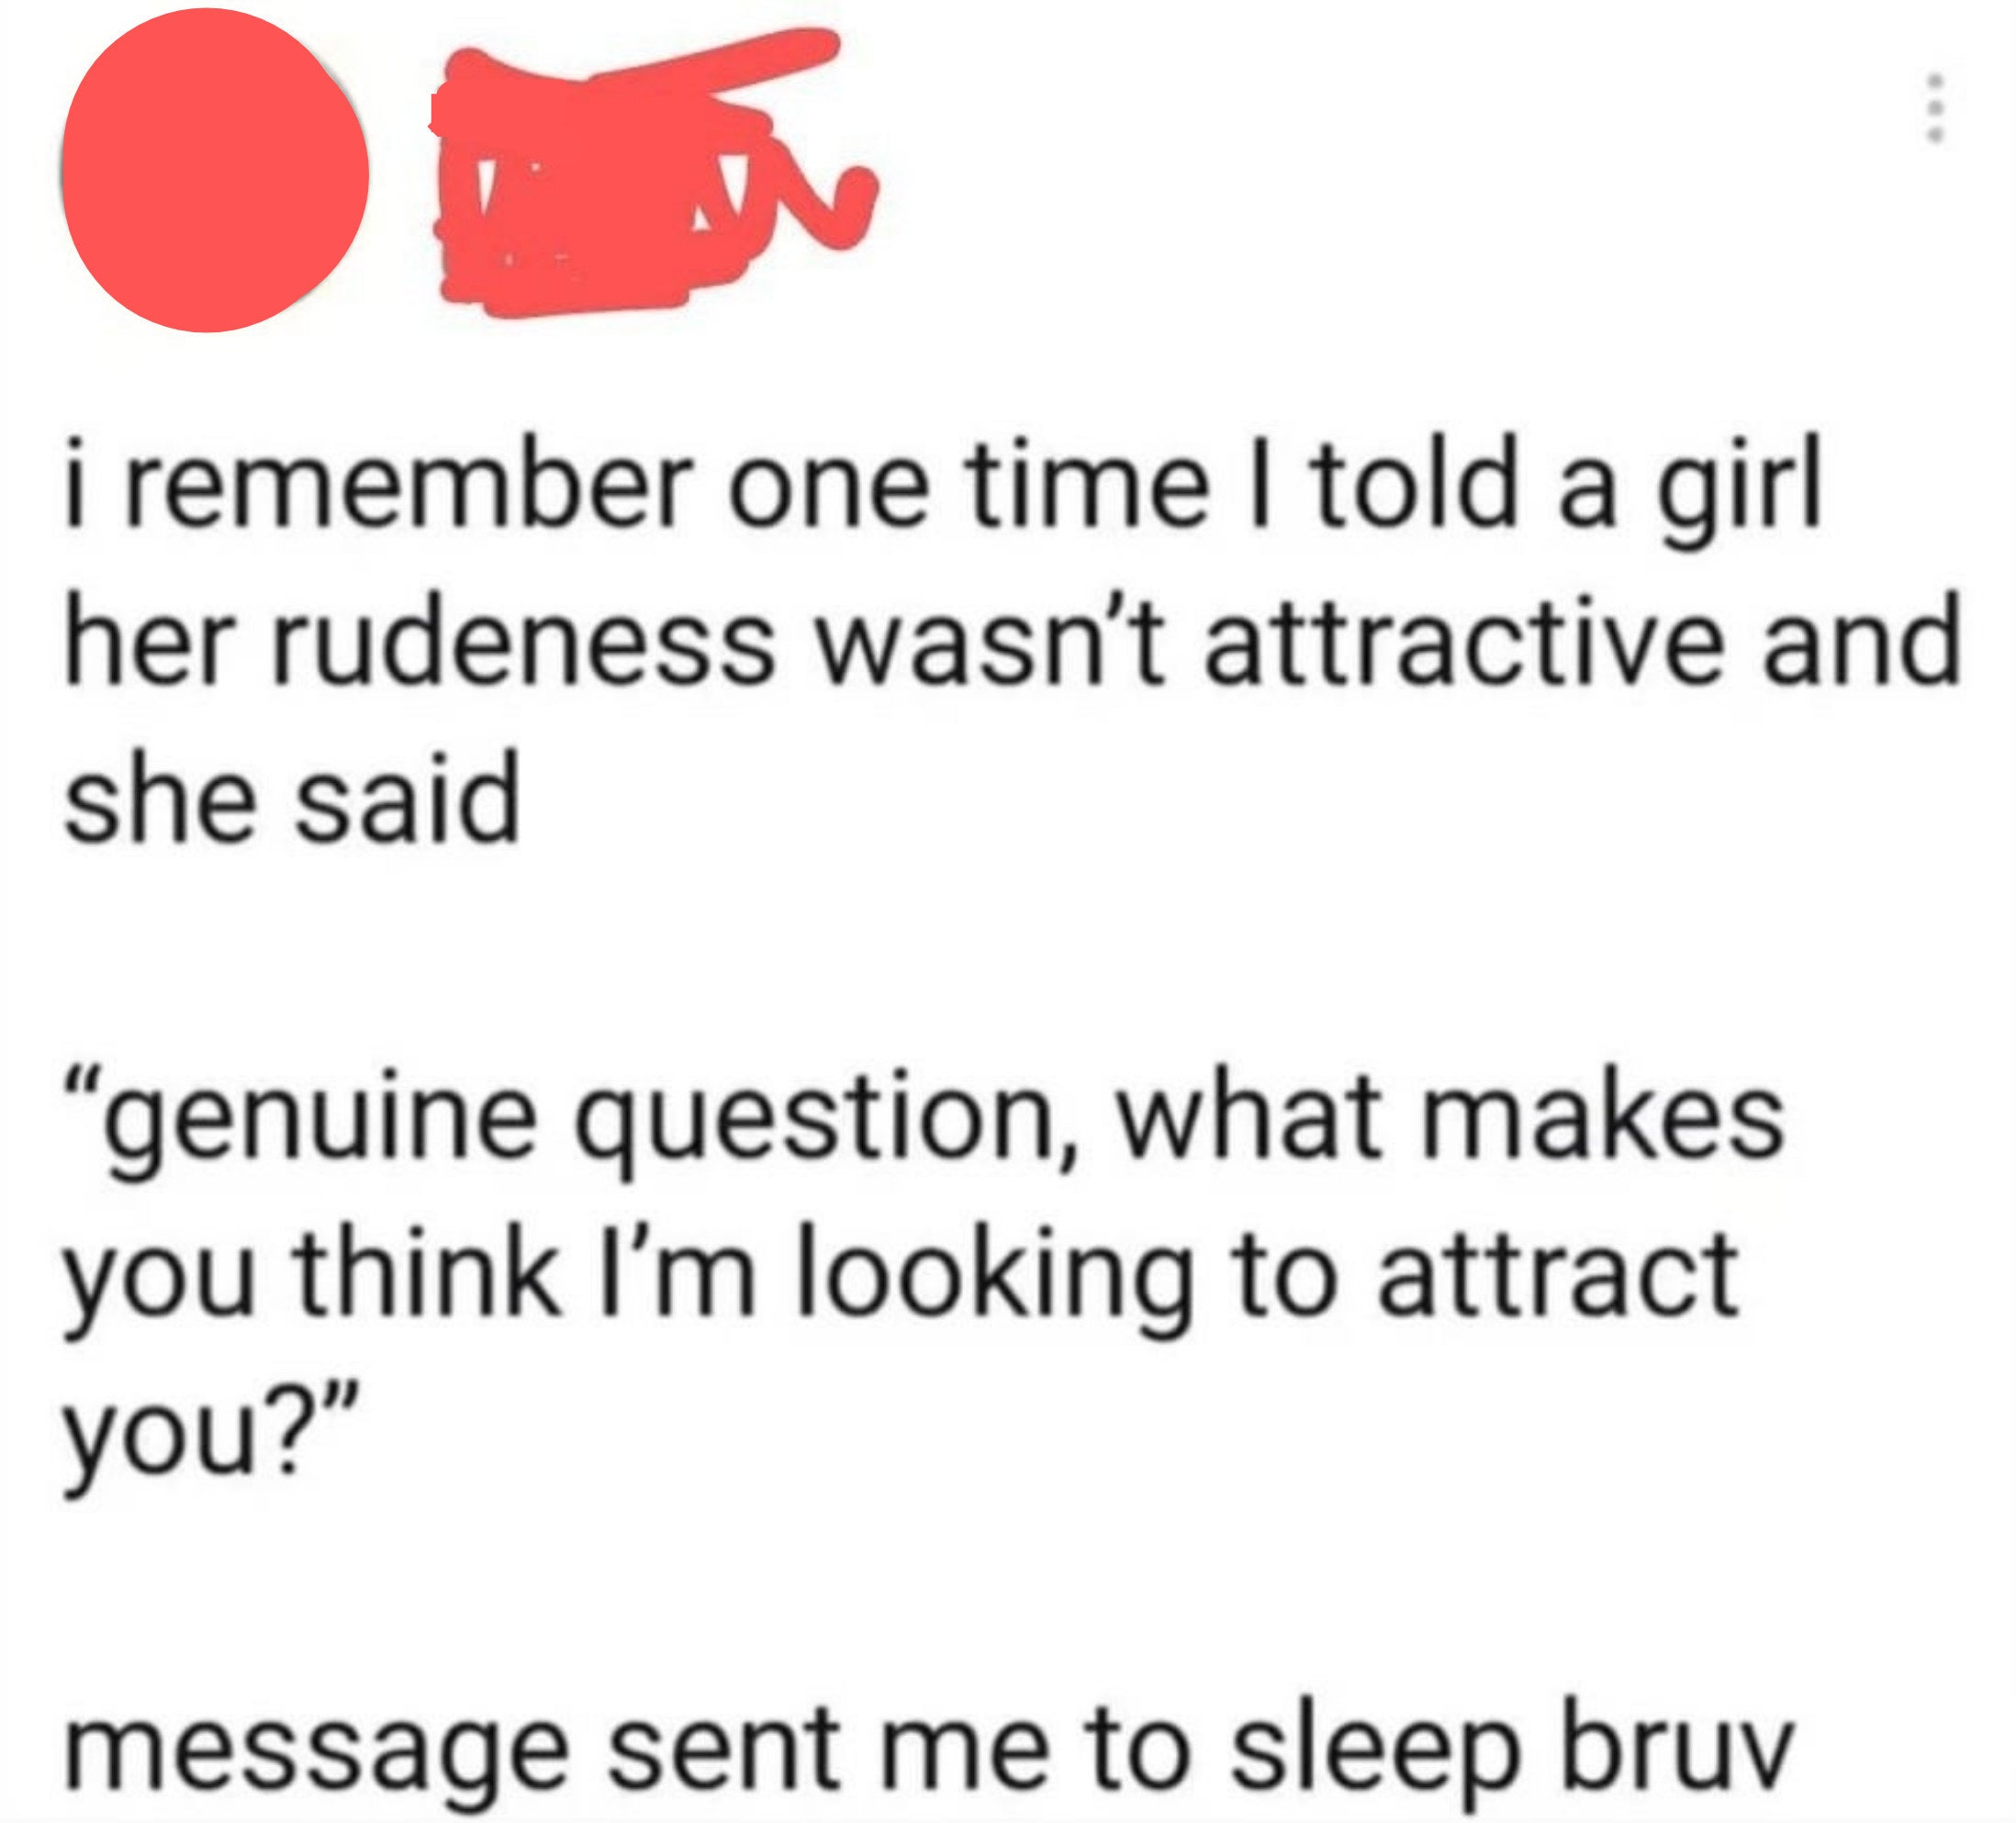 &quot;genuine question, what makes you think I&#x27;m looking to attract you?&quot;